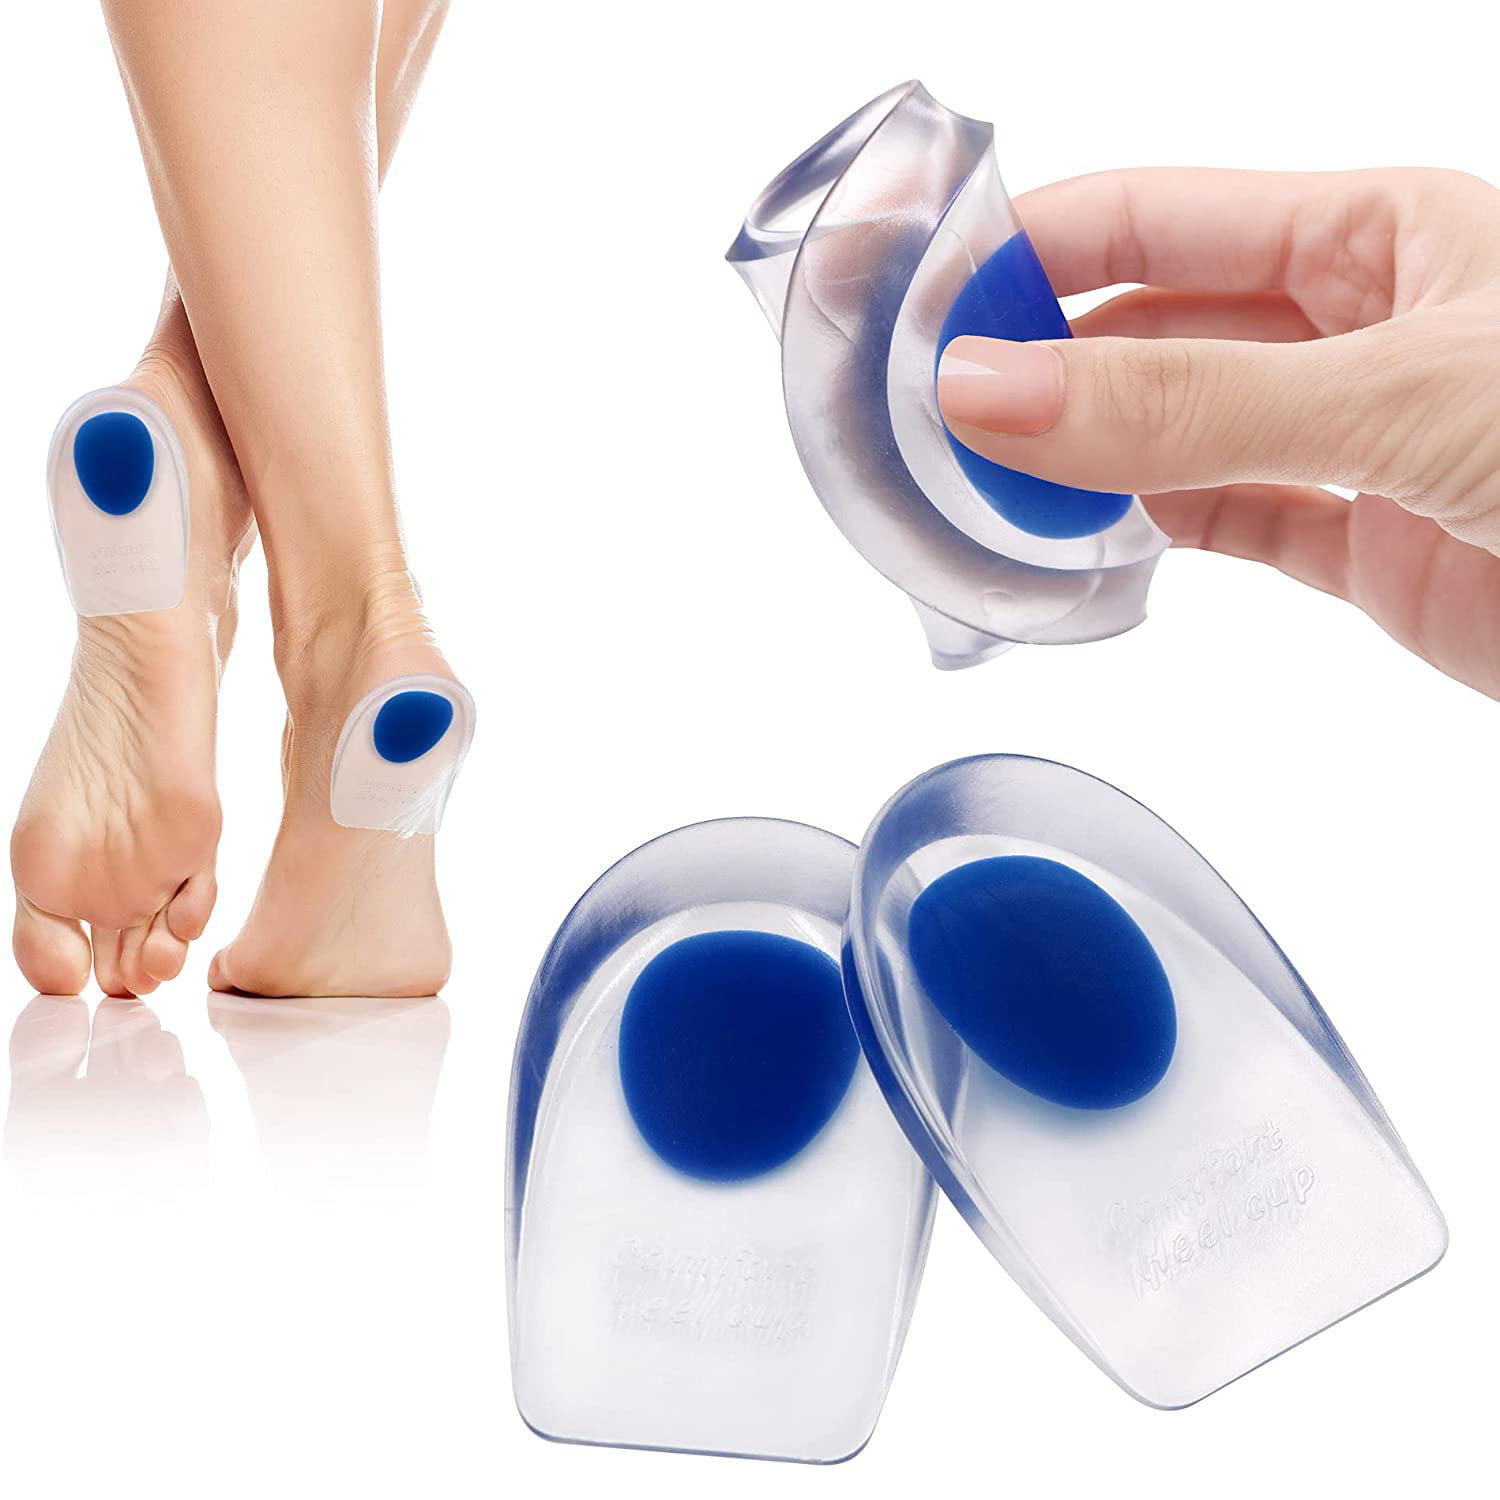 Heel Support Pad Cup Gel Silicone Shock Cushion Orthotic Insole Plantar Care KY 